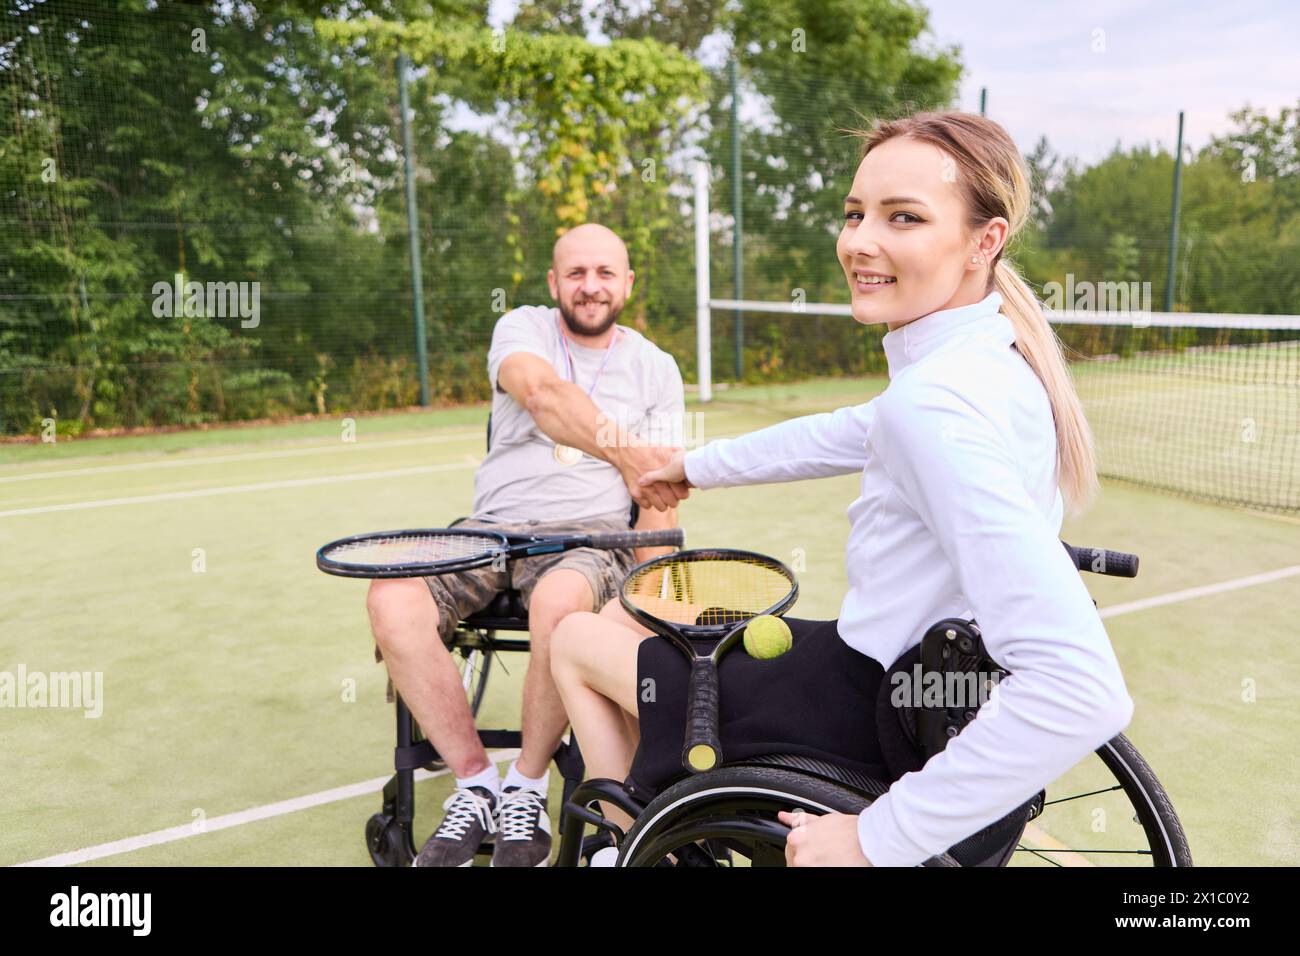 A paraplegic man and woman engaging in wheelchair tennis, showcasing positivity and adaptive sports. Stock Photo